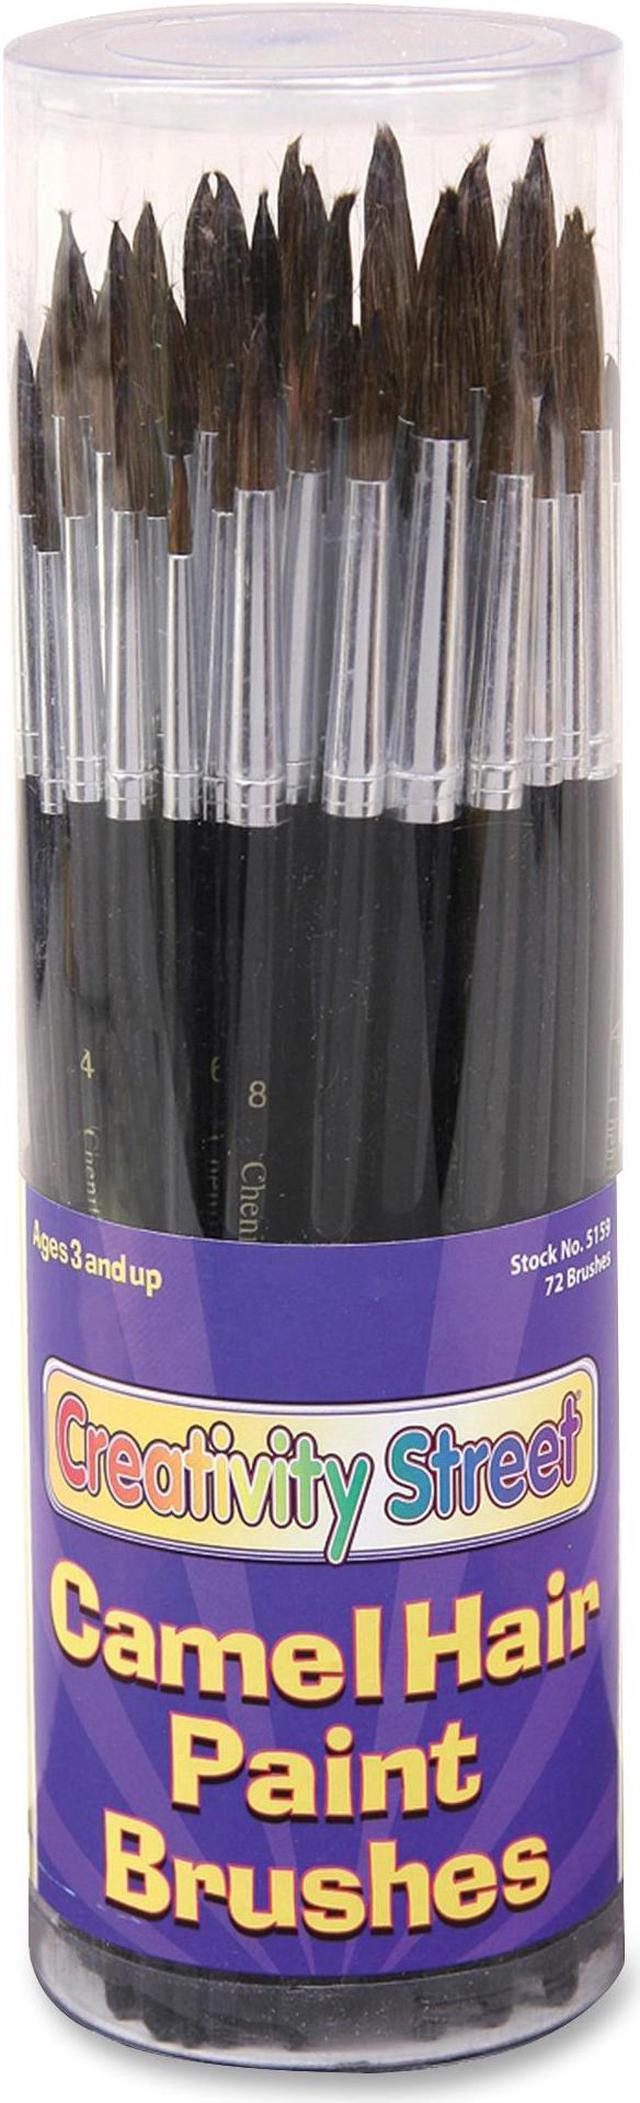 72 Wholesale 5 Piece Craft Paint Brushes - at 